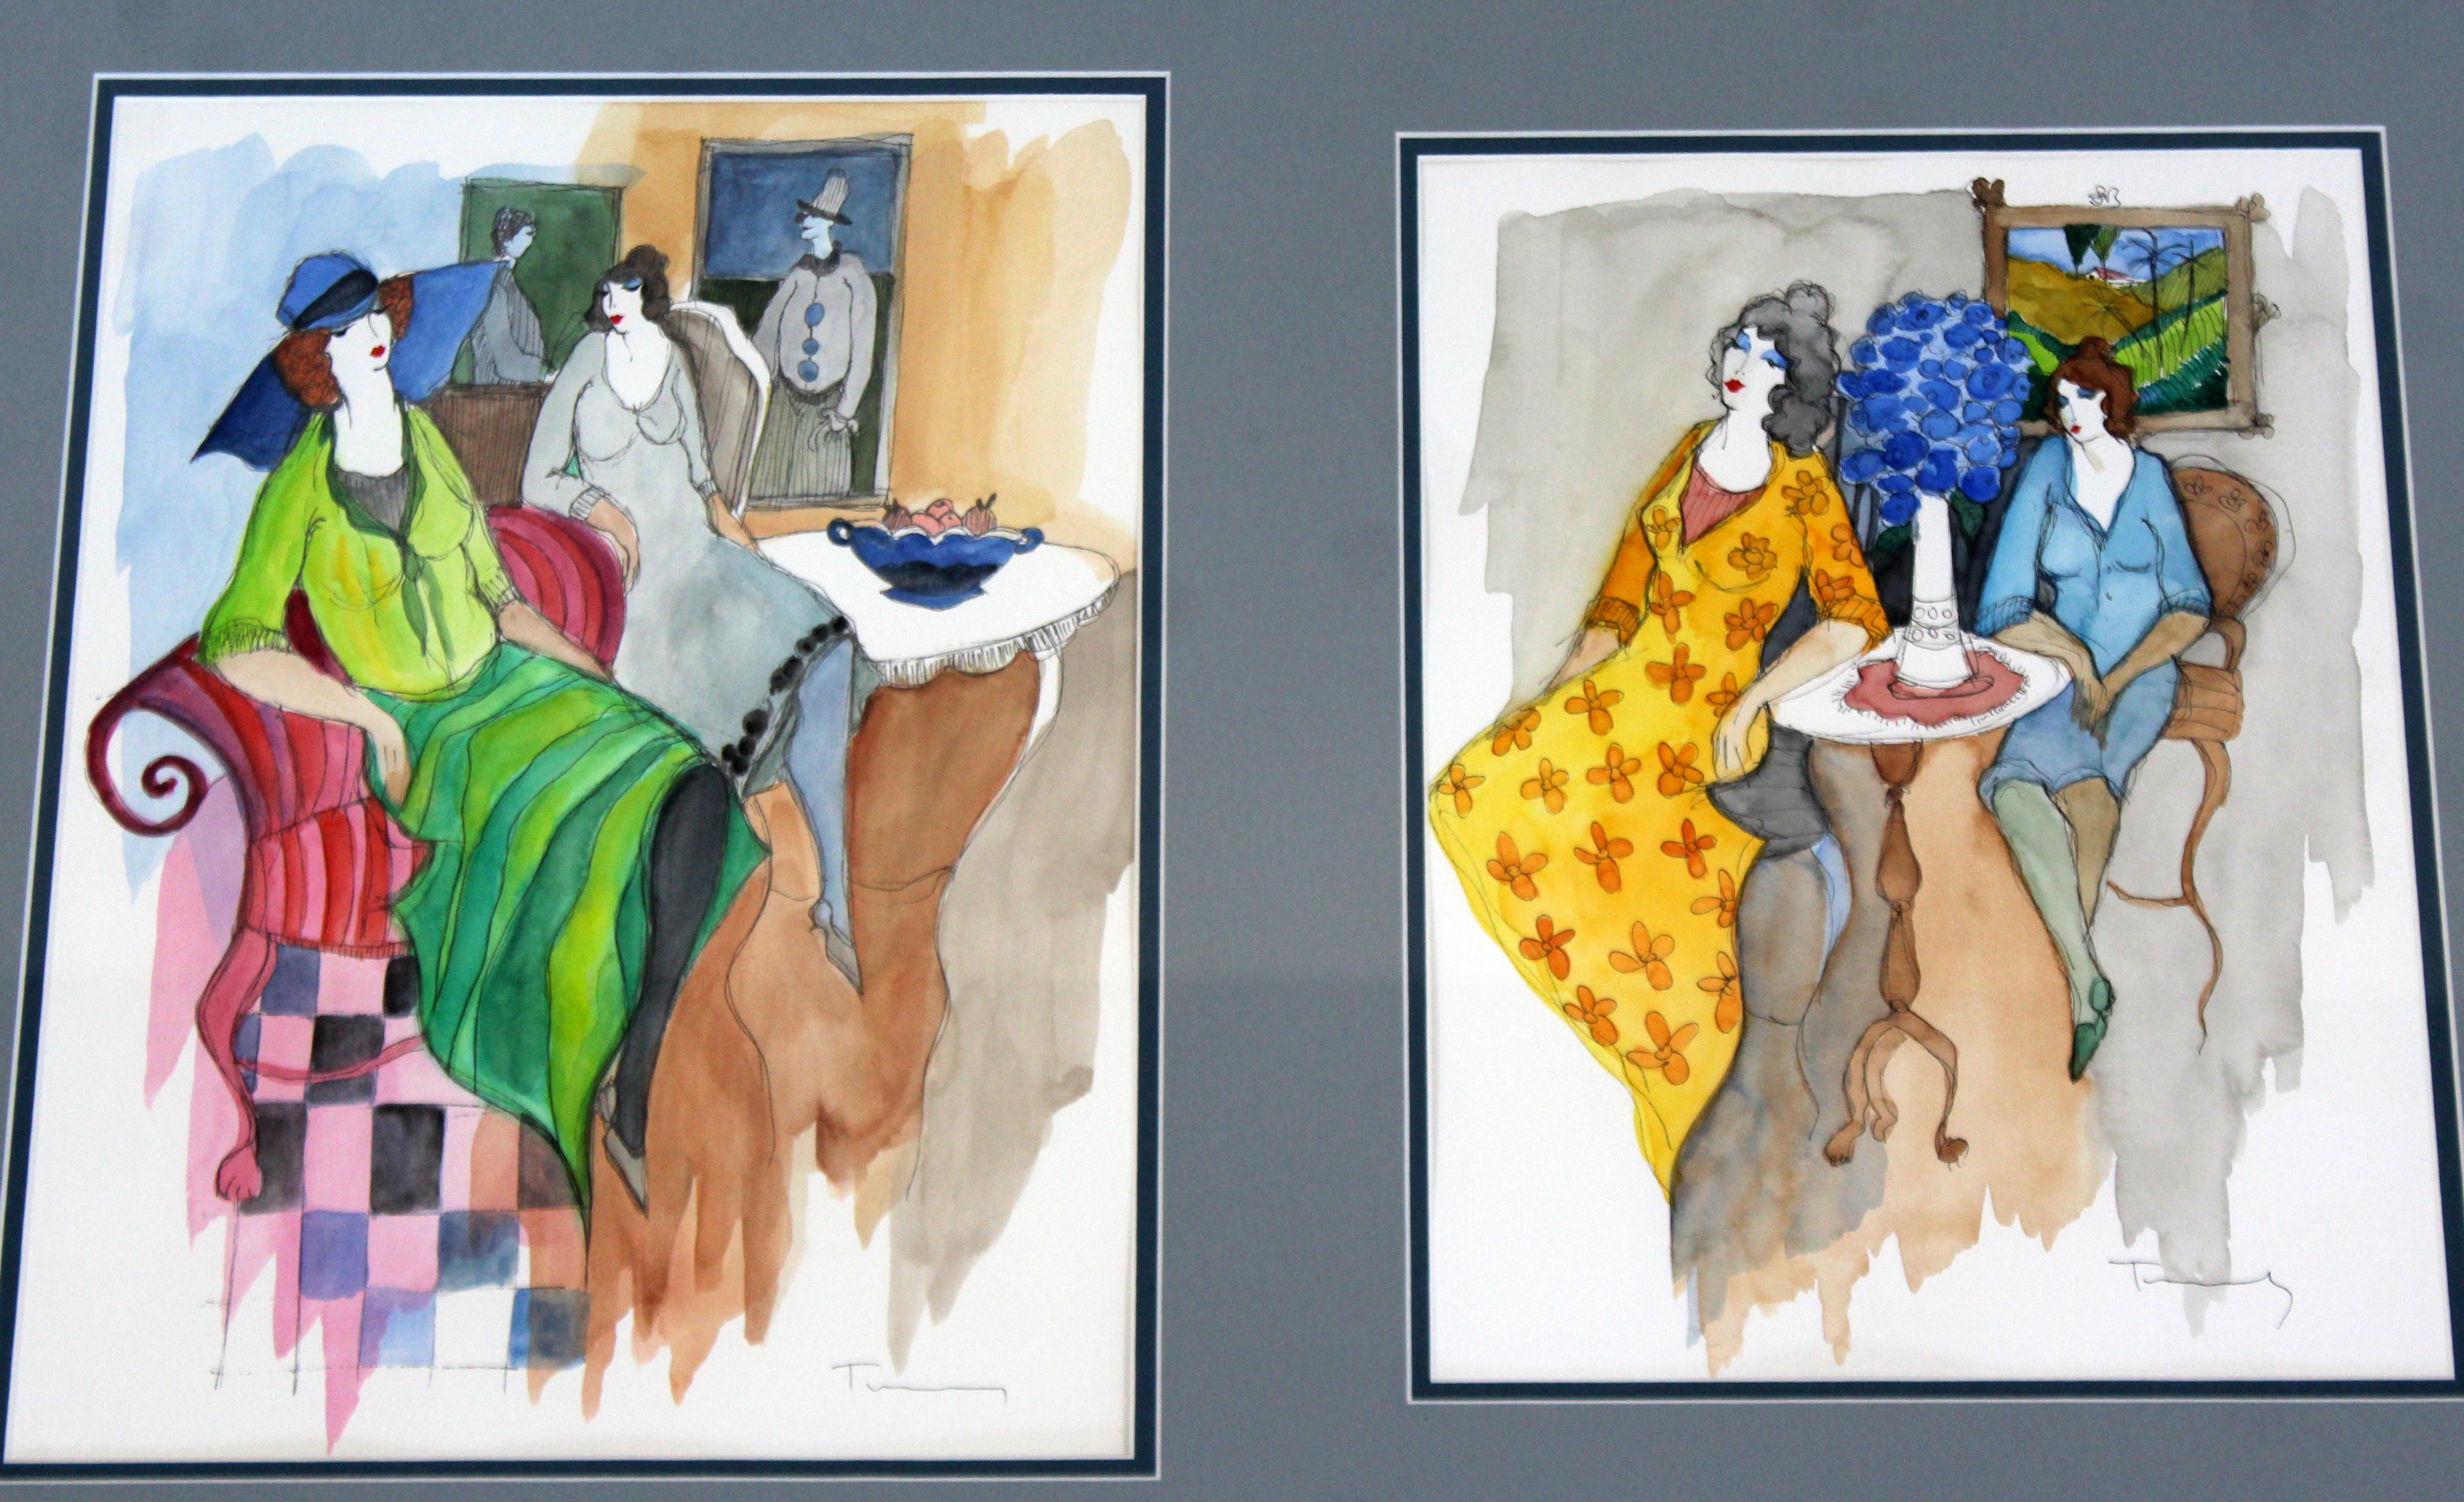 For your consideration is a frame arrangement of four stunning unique watercolors and mixed media on woven paper, signed by artist in silver frame.  Itzchak Tarkay is considered to be a key figure in the modern figurative movement.  Artwork by the